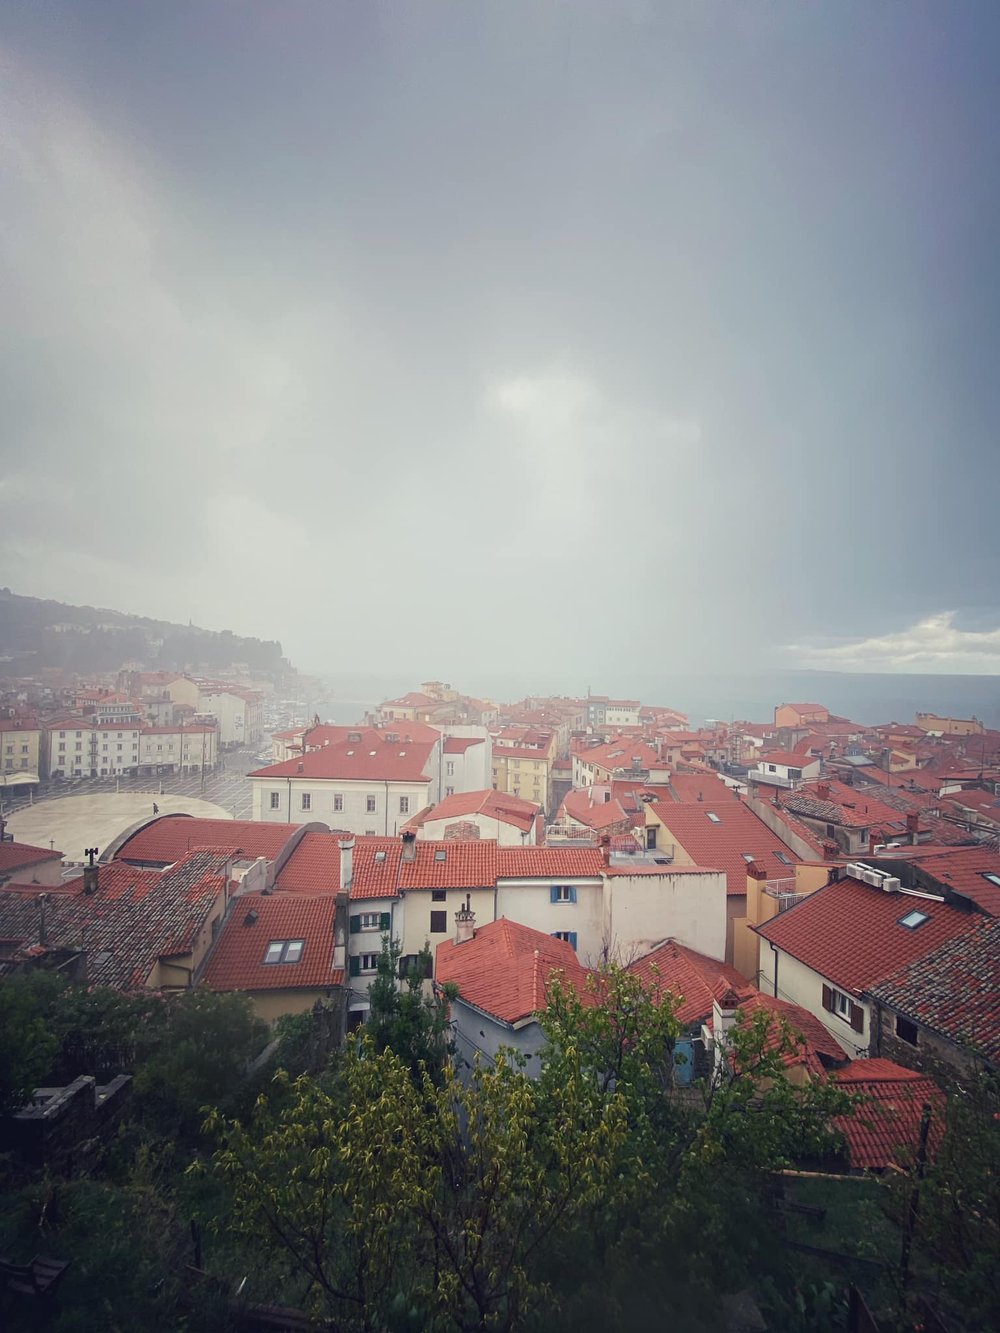  A stormy morning. As I picked my way down centuries-old, steep, suddenly slick cobblestones, I came across an elderly local woman struggling with a cane in one hand and an umbrella in the other. I offered an arm, took her things, and we navigated th